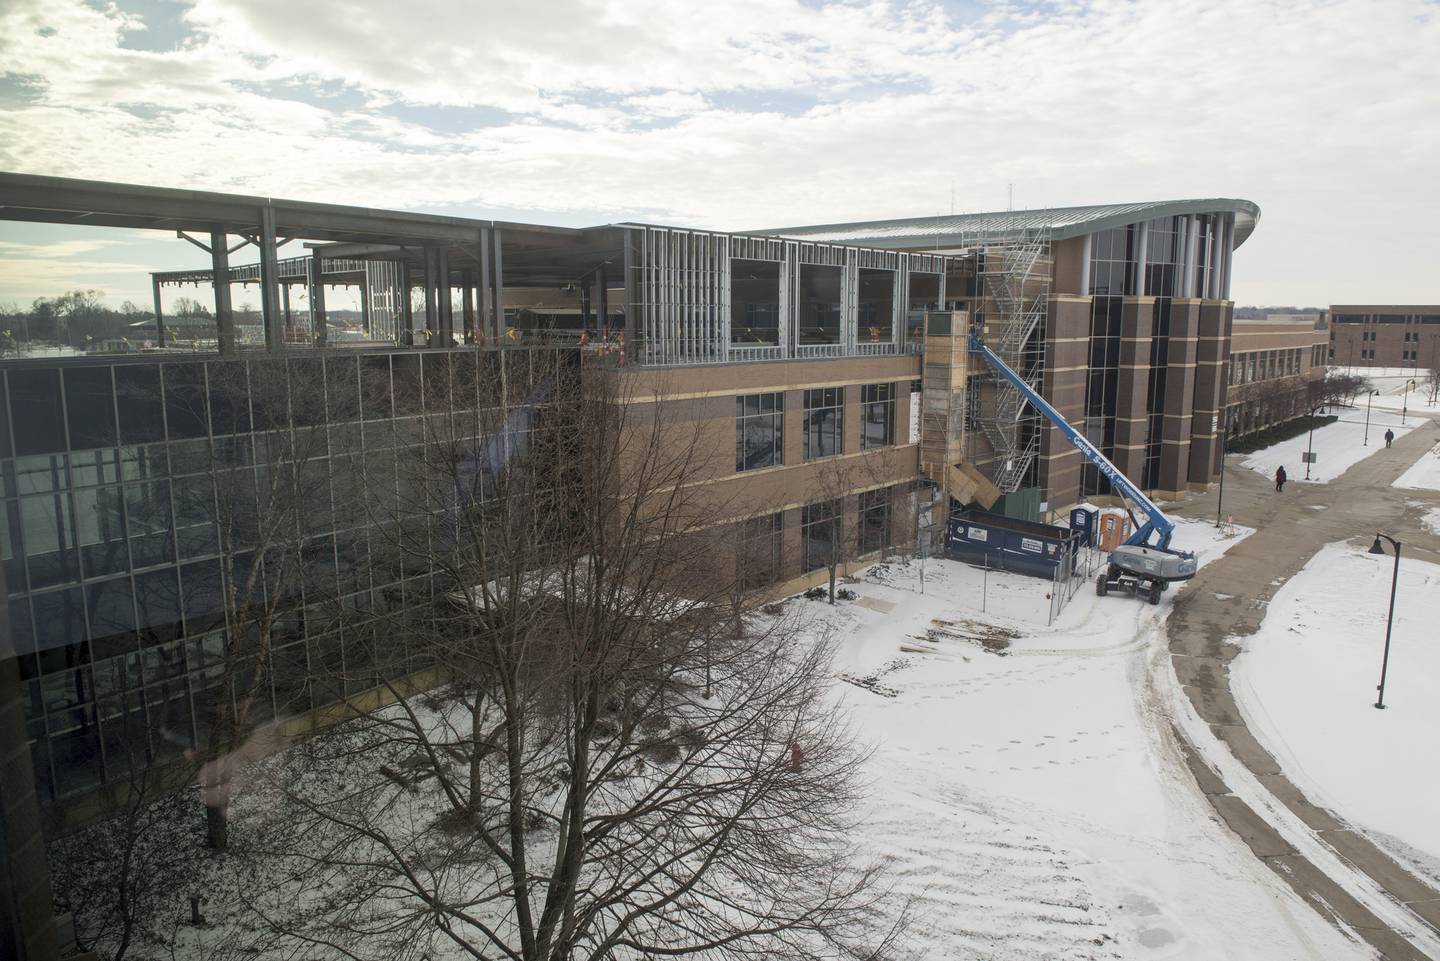 Construction at the DuPage County Courthouse as preparations continue for the implementation of the new SAFE-T Act. The County Board in March set aside about $20 million related to changes in court-related infrastructure.